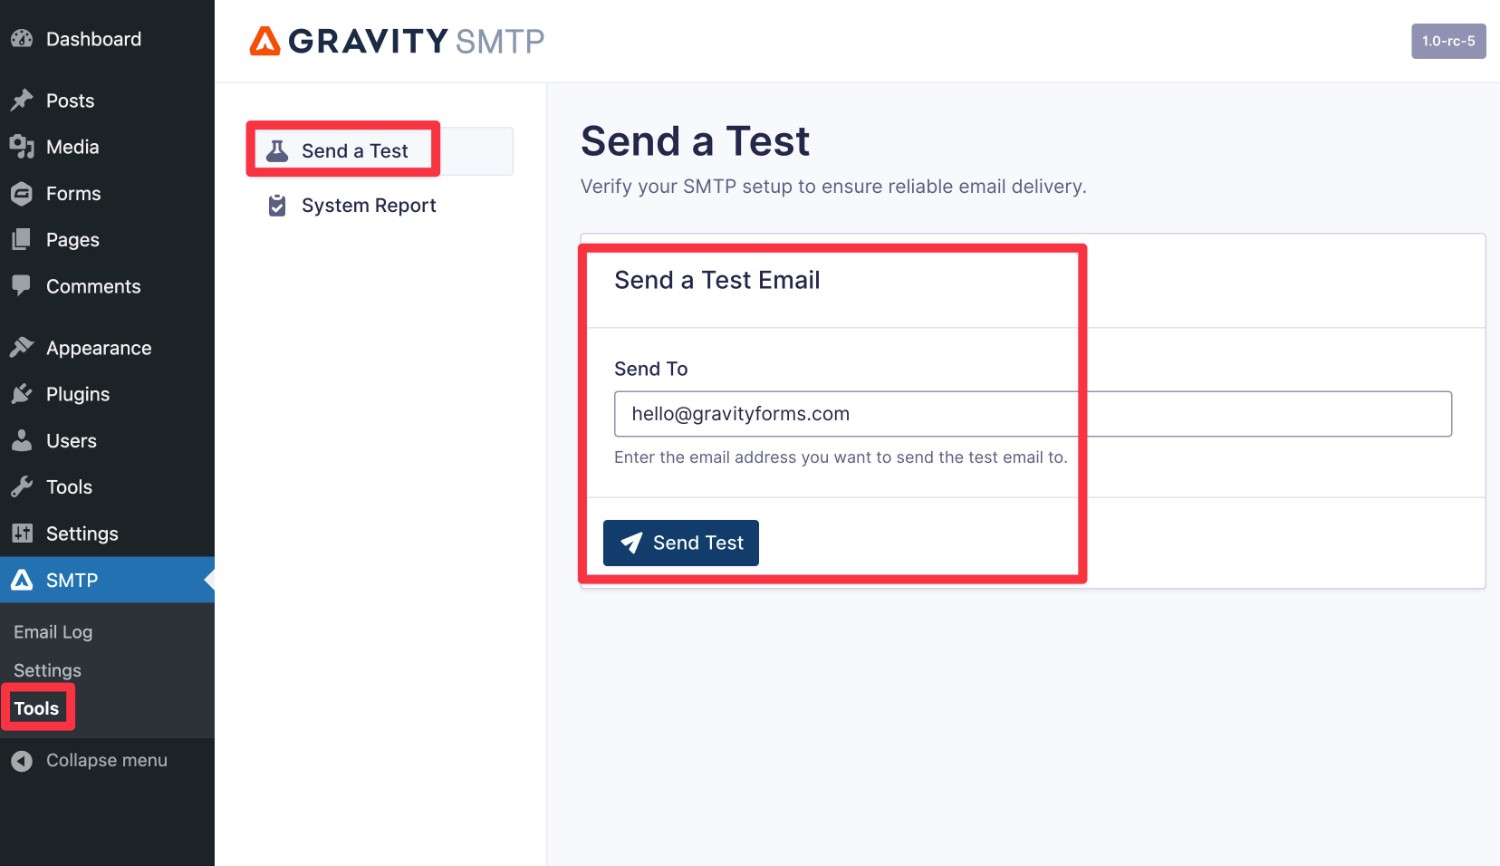 How to Send a test email using Gravity SMTP